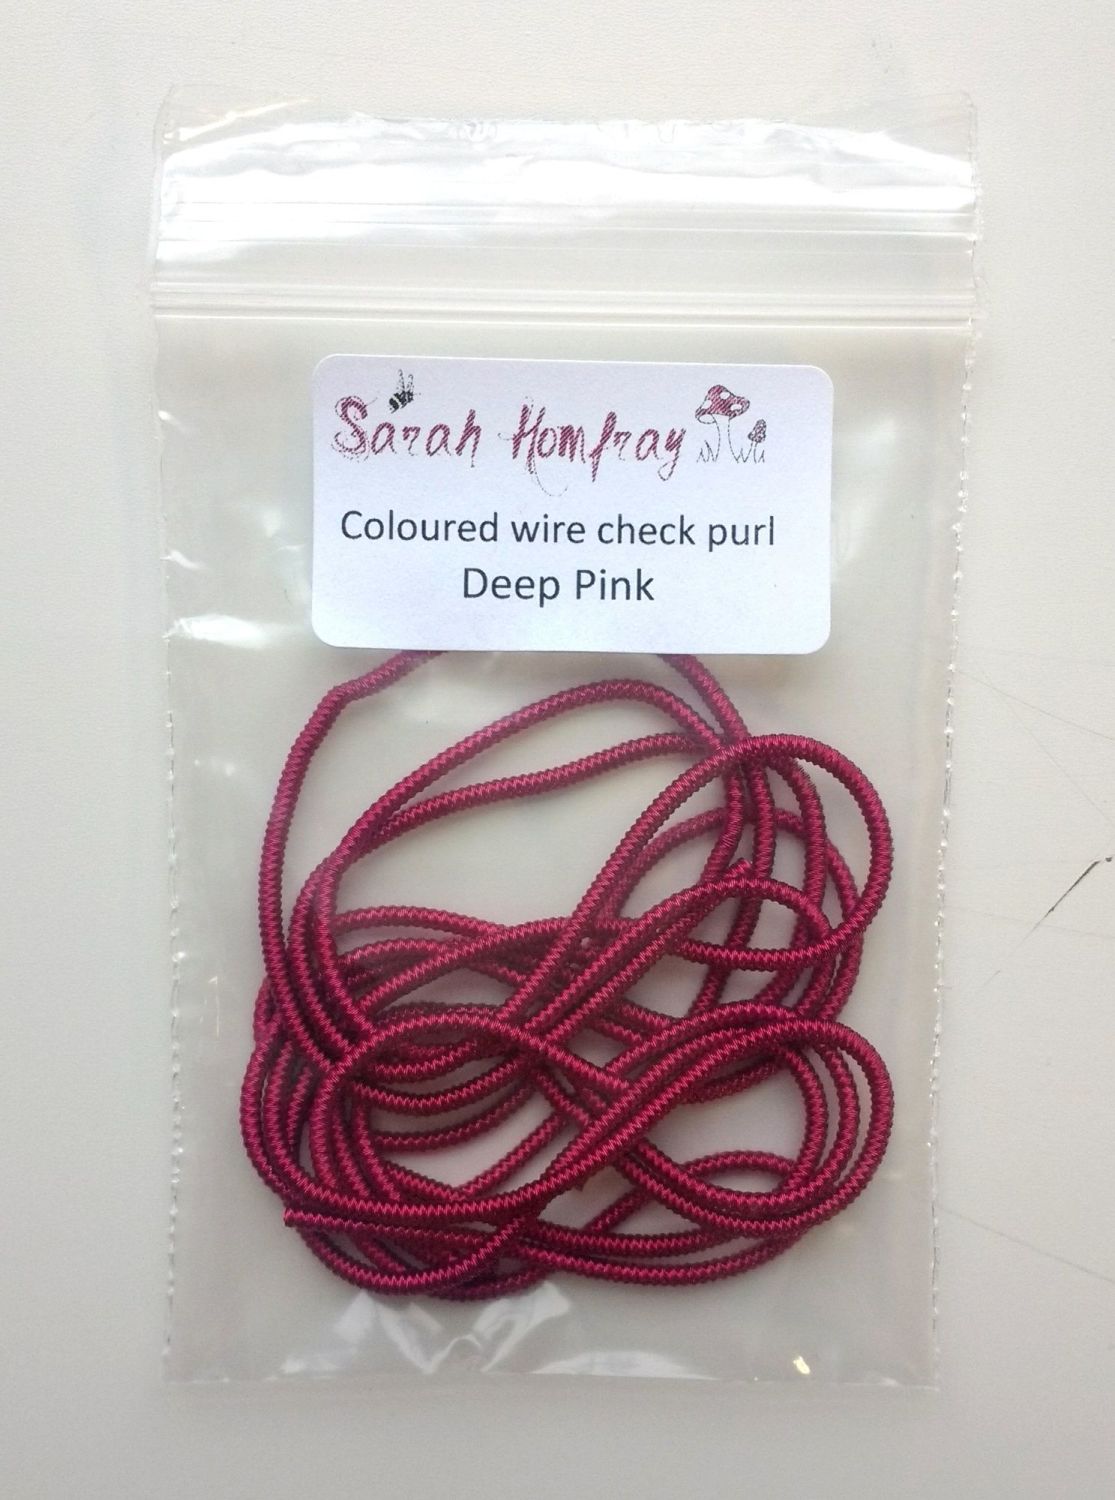 NEW! Coloured Wire check purl no.6 - Deep Pink